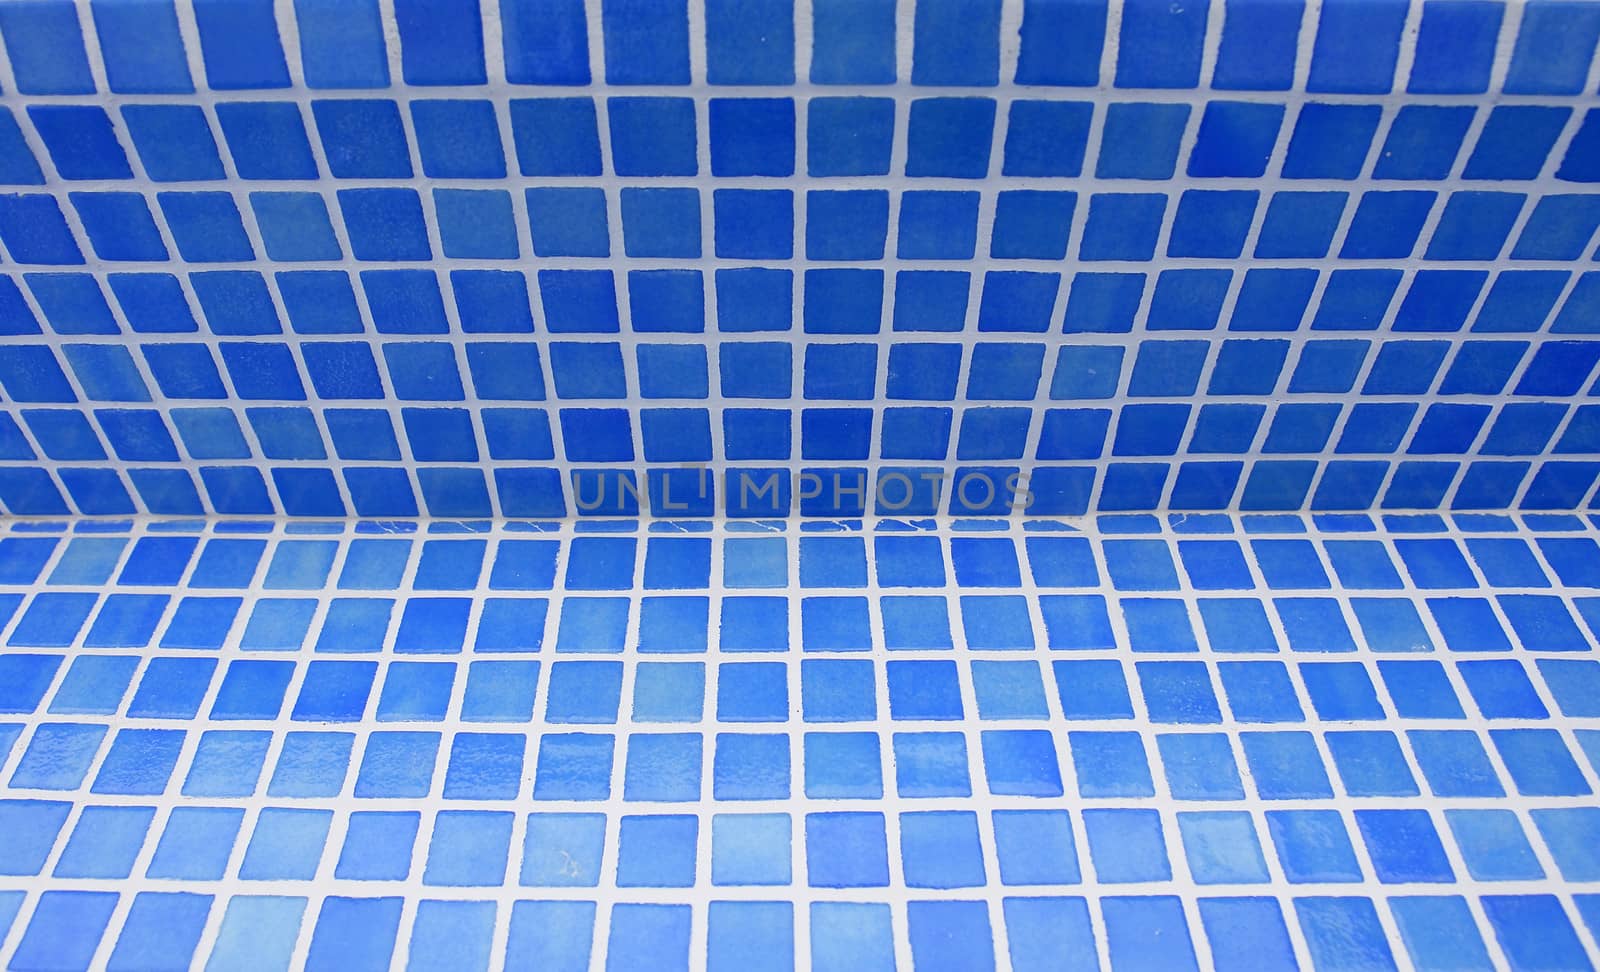 Swimming pool tile pattern by ptxgarfield